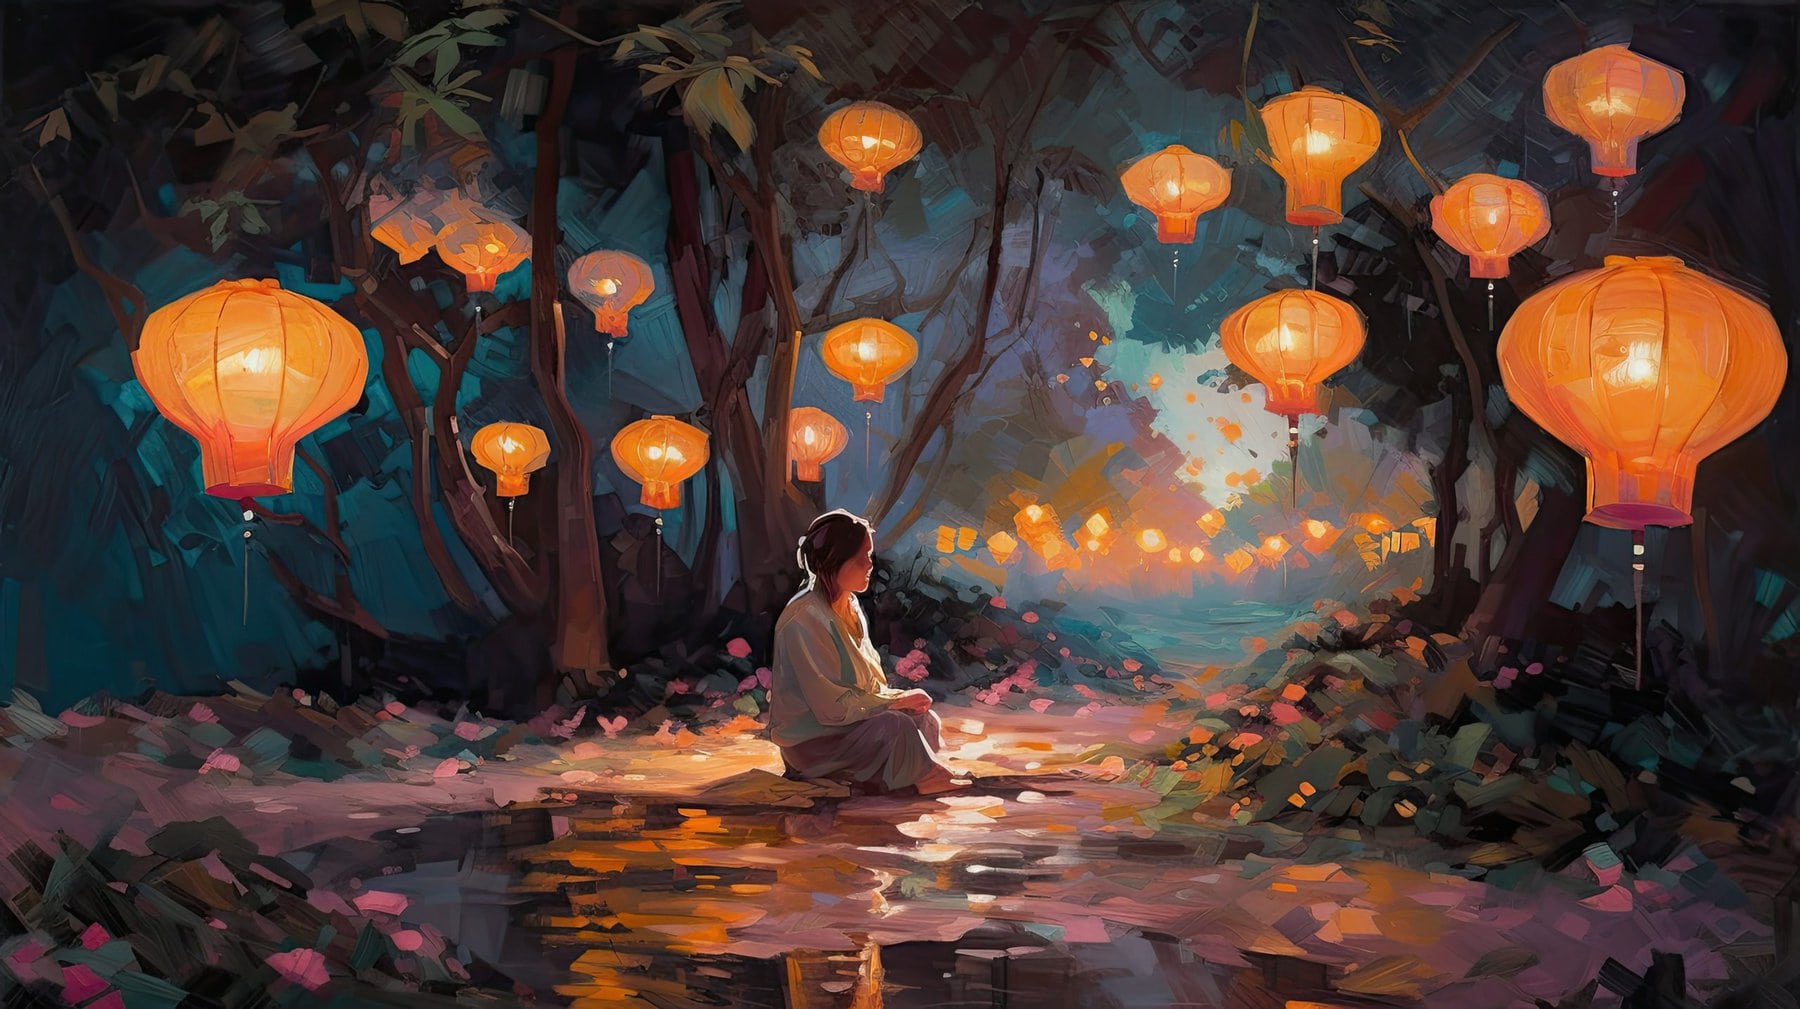 A serene and peaceful garden illuminated by hundreds of glowing paper lanterns, as a solitary figure meditates in quiet contemplation illustrations, ai art